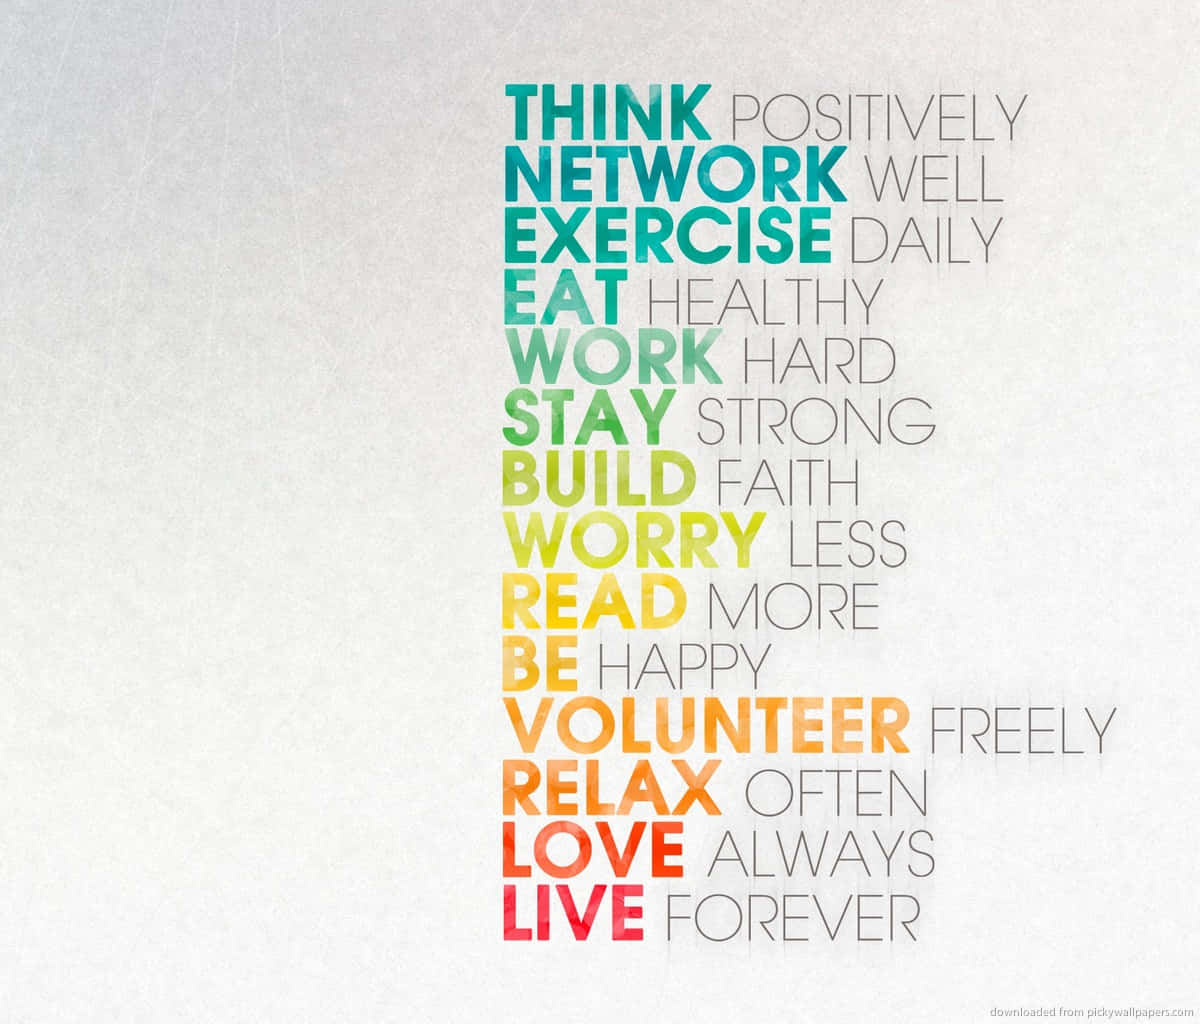 A Poster With The Words Think Positively, Network, Exercise, Work, Live, And Love